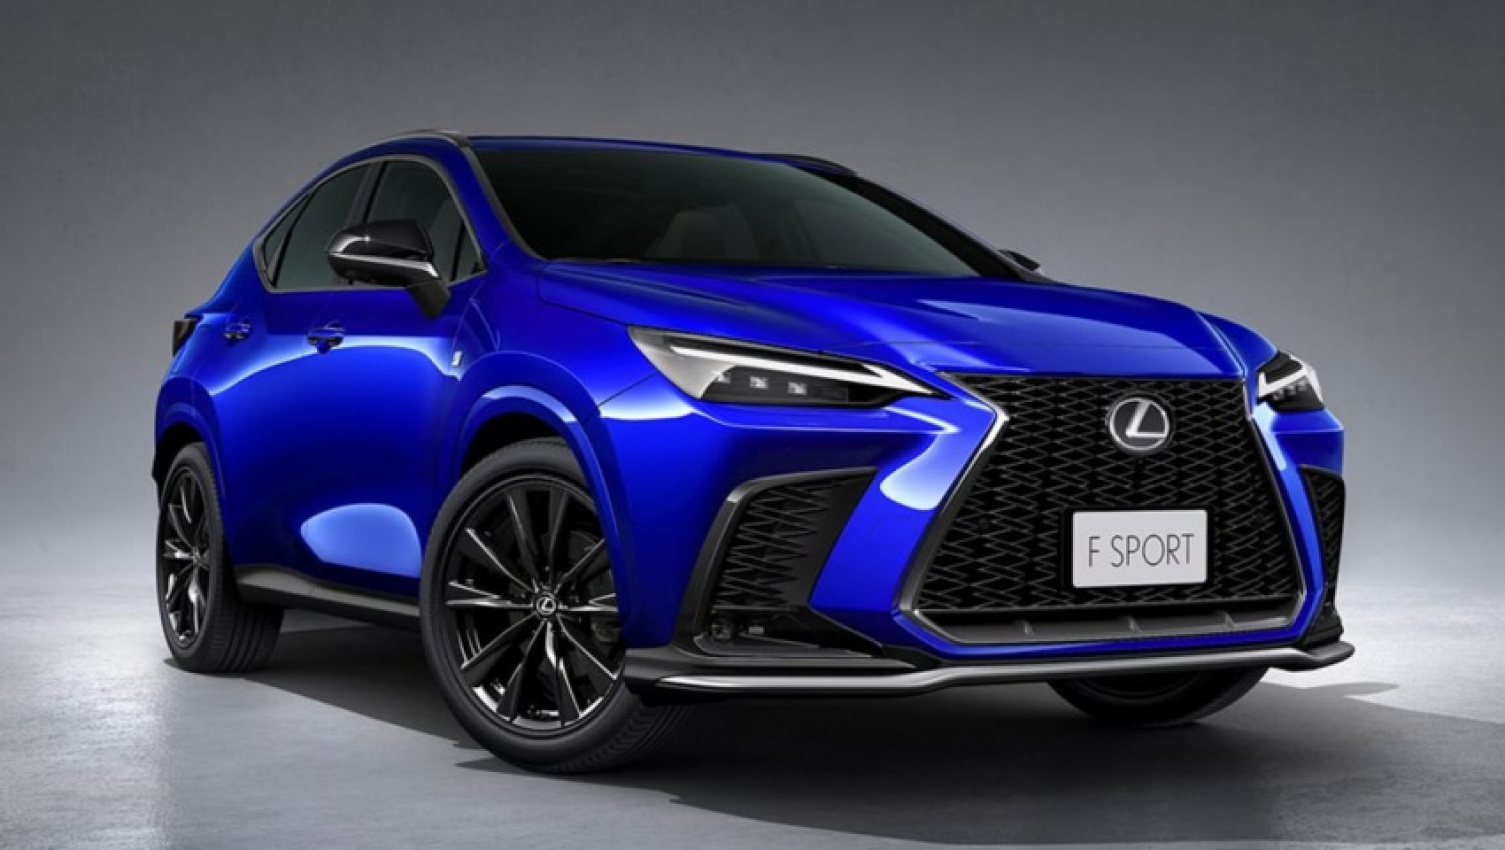 audi, autos, bmw, cars, lexus, mercedes-benz, audi q5, bmw x3, hybrid cars, industry news, lexus news, lexus nx, lexus nx 2022, lexus suv range, mercedes, mercedes-benz glc, plug in hybrid, showroom news, could the new 2022 lexus nx become australia's top-selling premium suv? keenly priced bmw x3, audi q5 and mercedes-benz glc rival to shake up segment with petrol, hybrid and phev